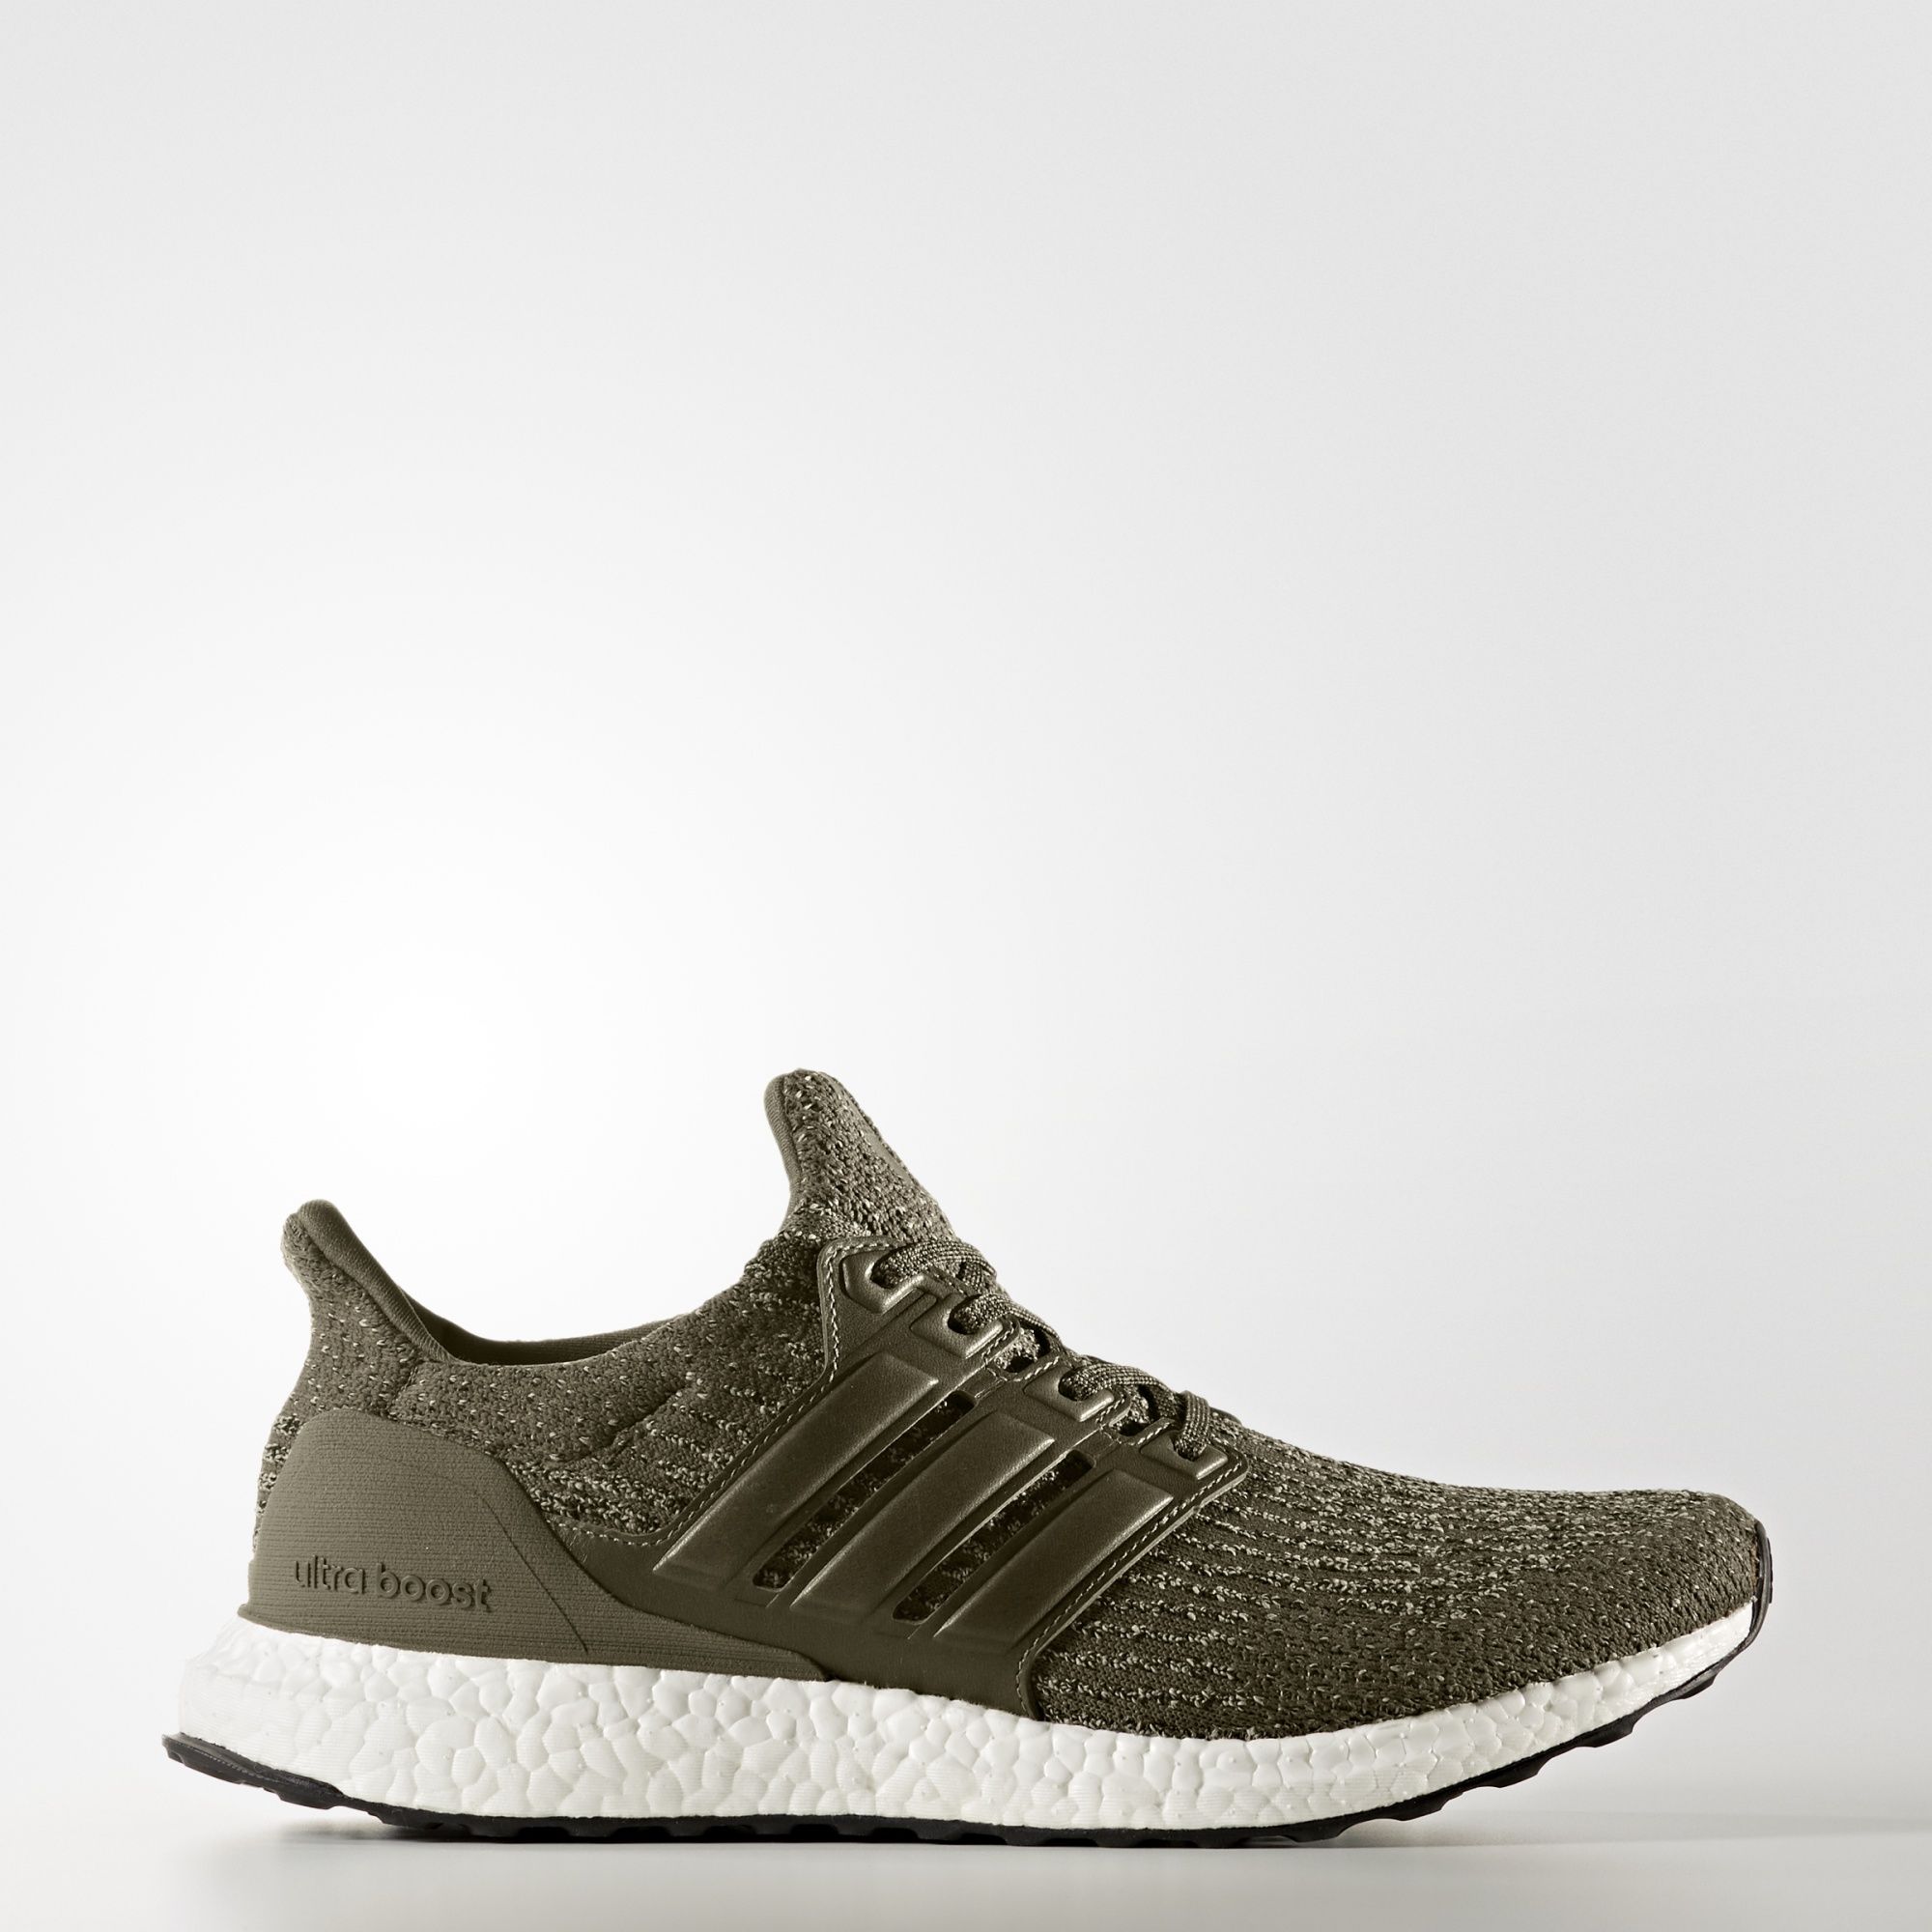 adidas-ultra-boost-3-0-trace-olive-2